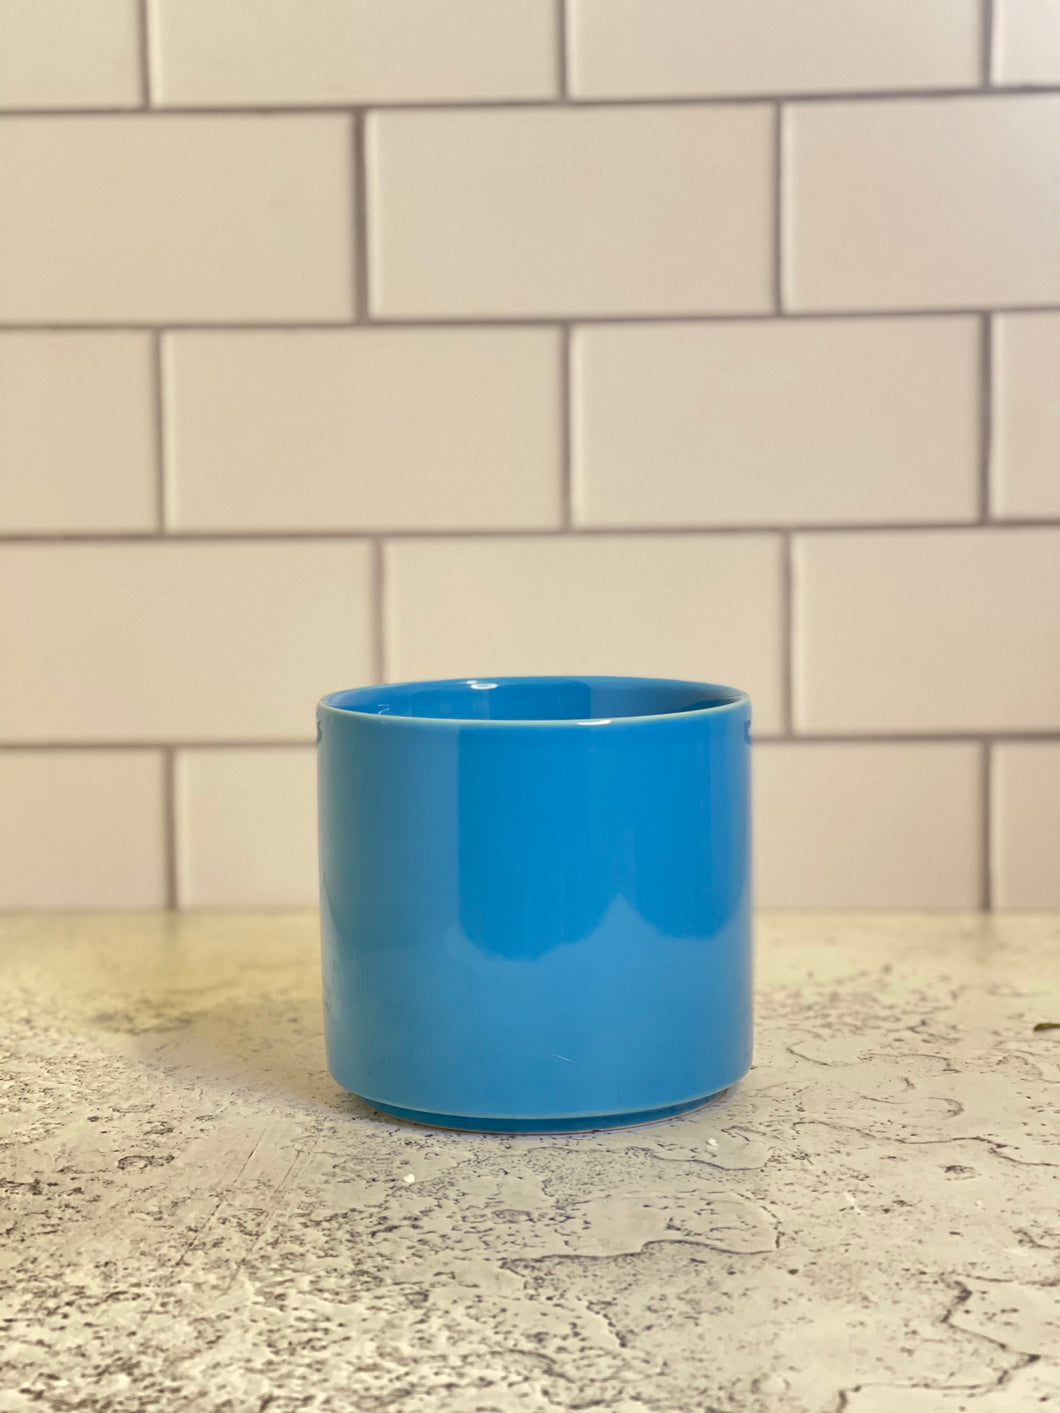 A bright blue cylinder-shaped planter pot with a glossy finish. The planter pot includes a drainage hole.